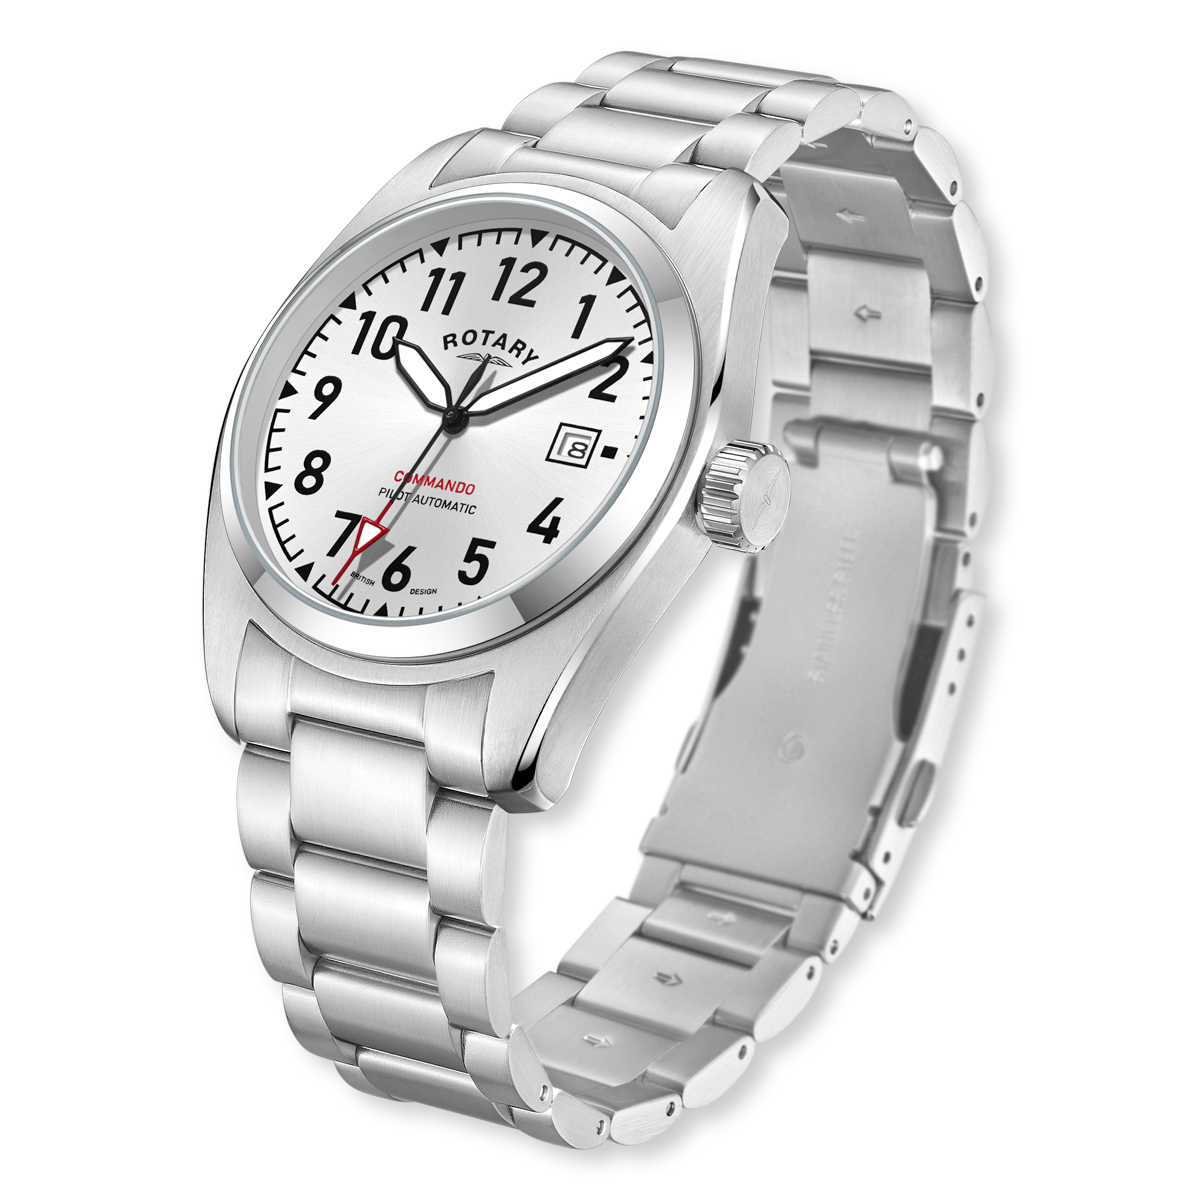 Rotary Sport Pilot Automatic, Silver Dial with Stainless Steel Bracelet - GB05470/22